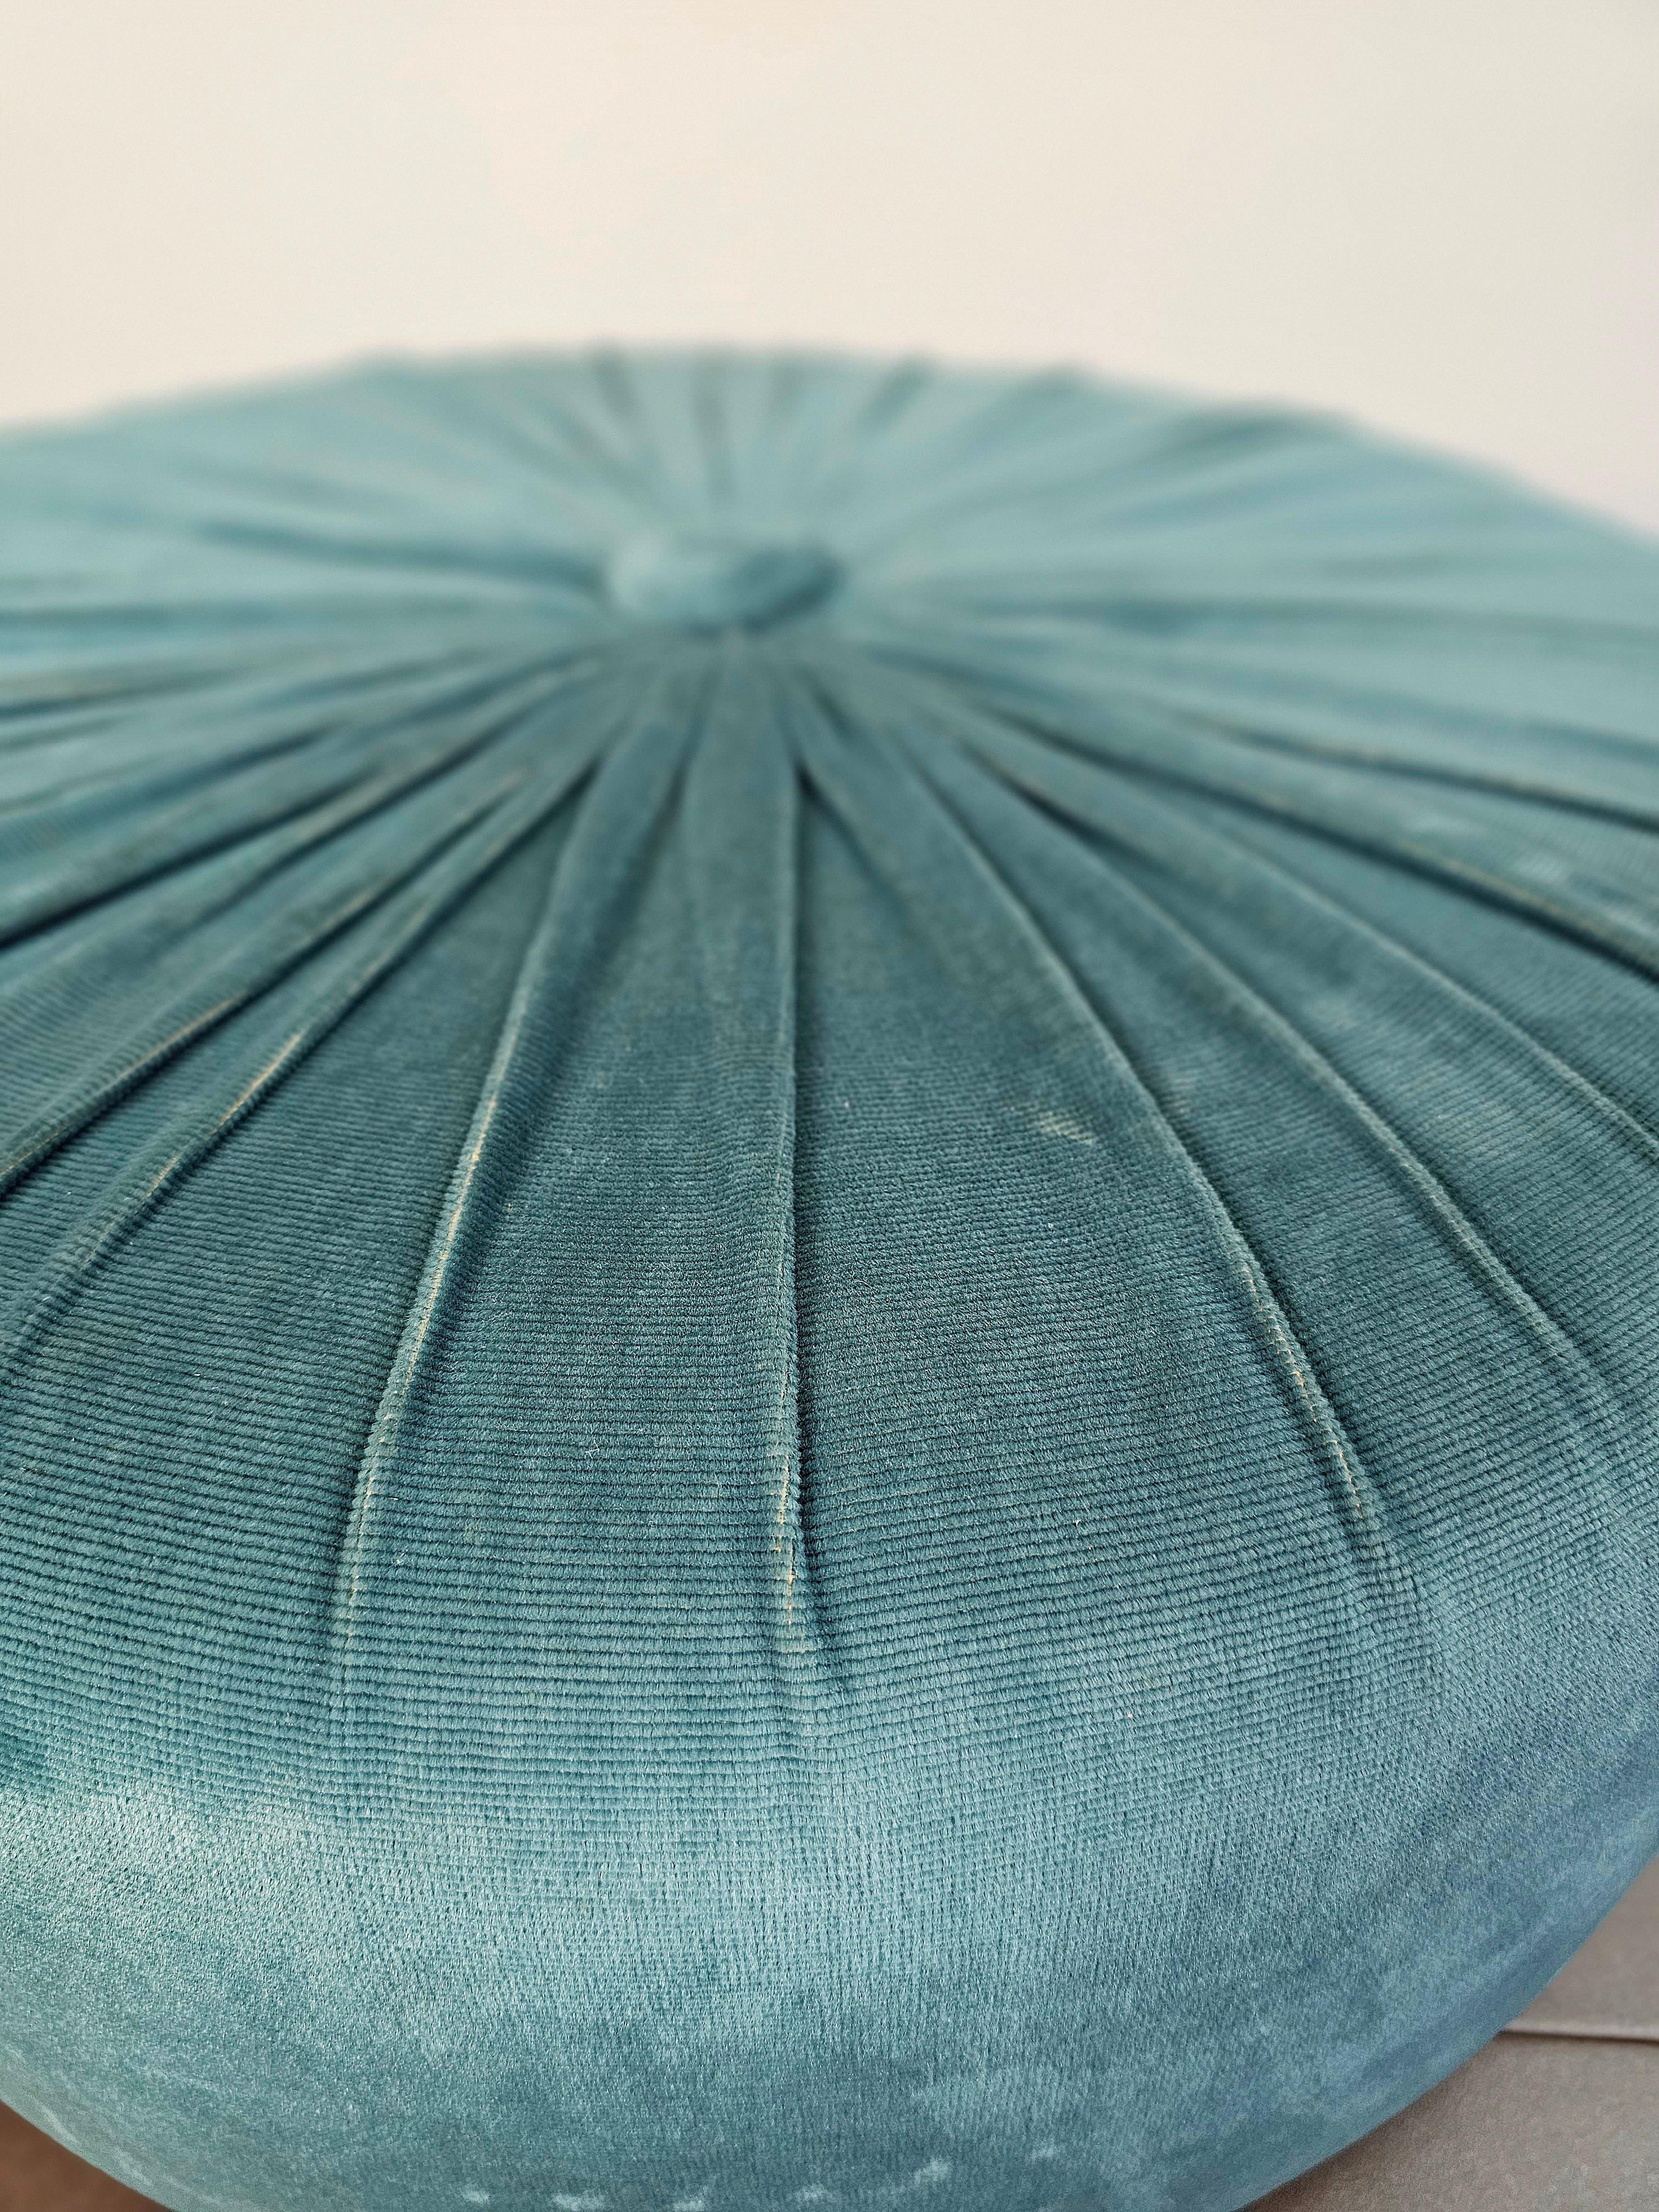 Pouf Turquoise Velvet Smooth Circular Midcentury Modern Italian Design 1960s In Fair Condition For Sale In Palermo, IT